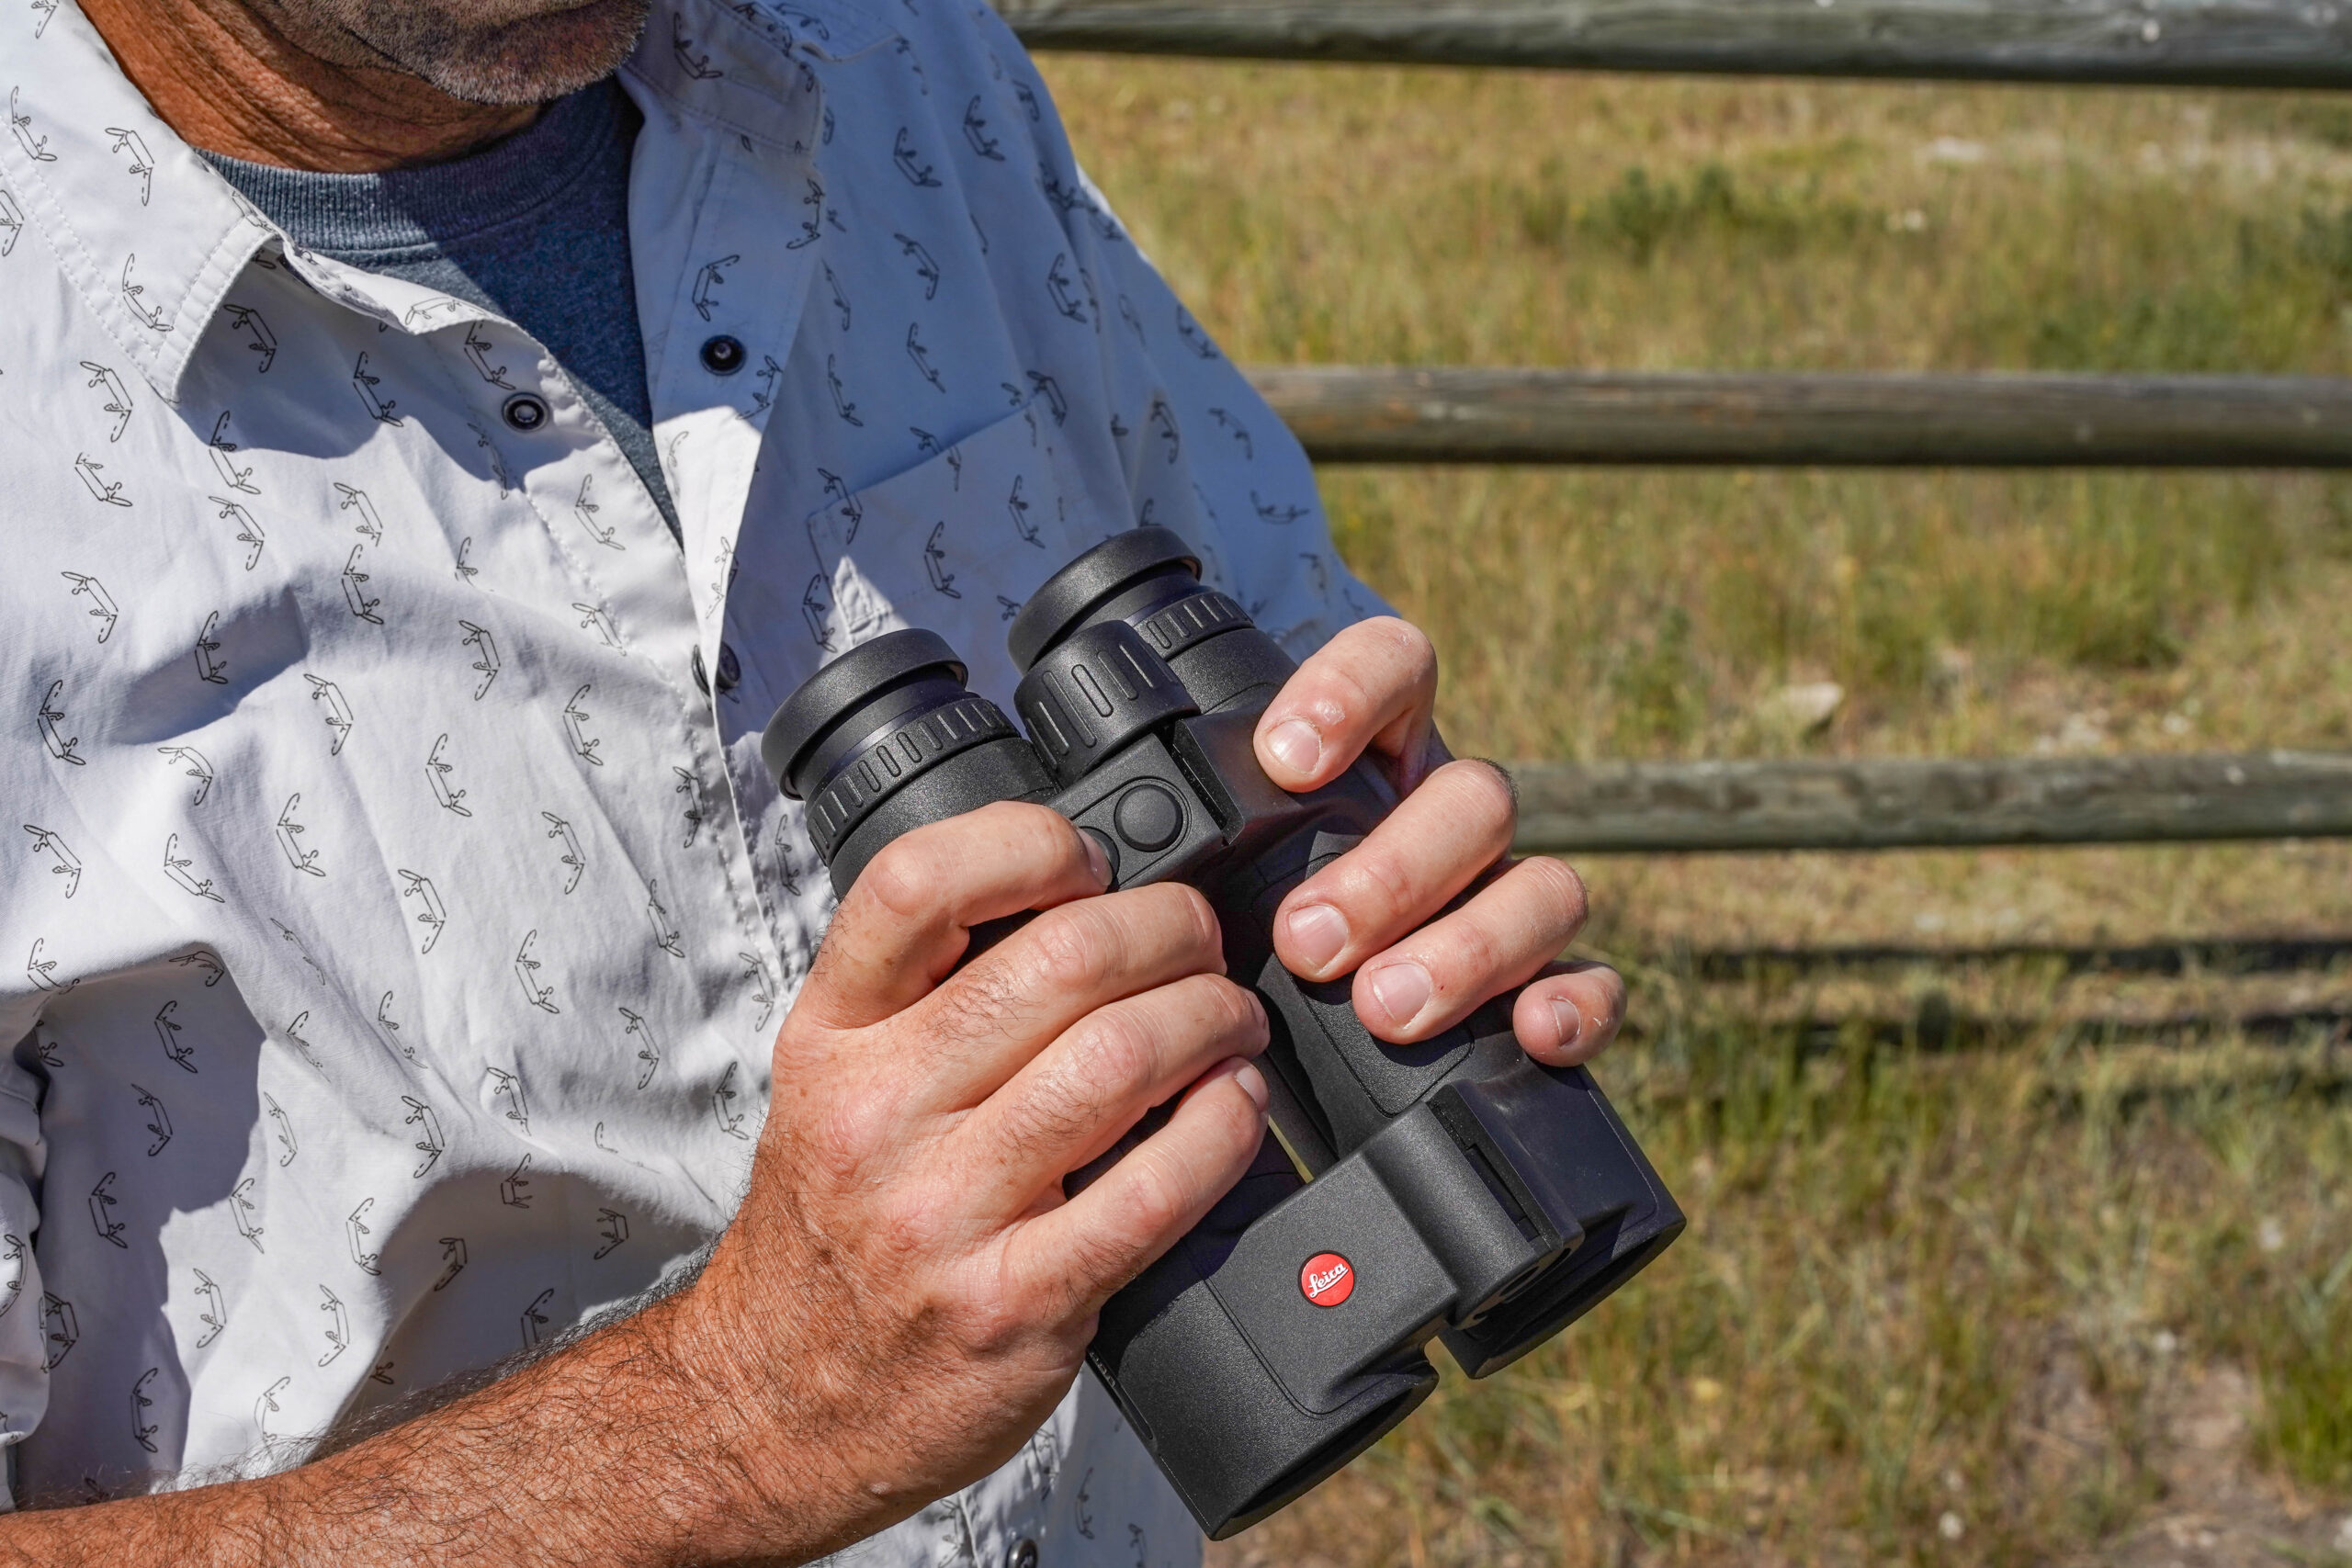 Leica Geovid Pro in the hand.